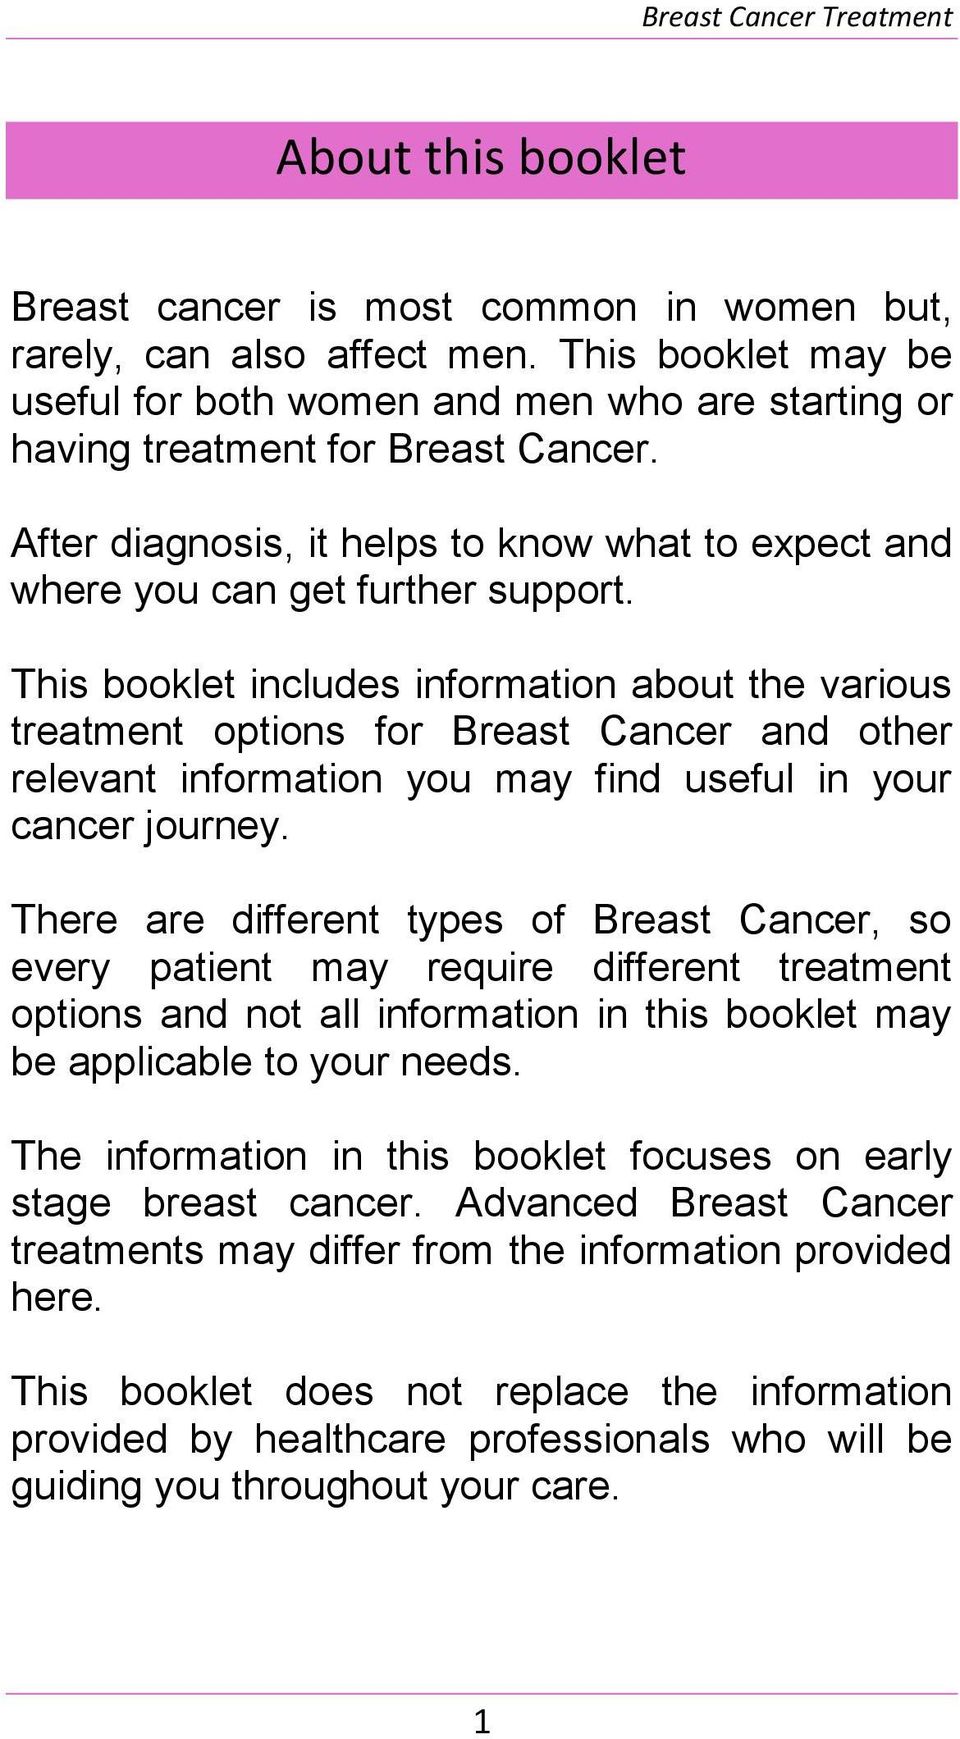 This booklet includes information about the various treatment options for Breast Cancer and other relevant information you may find useful in your cancer journey.